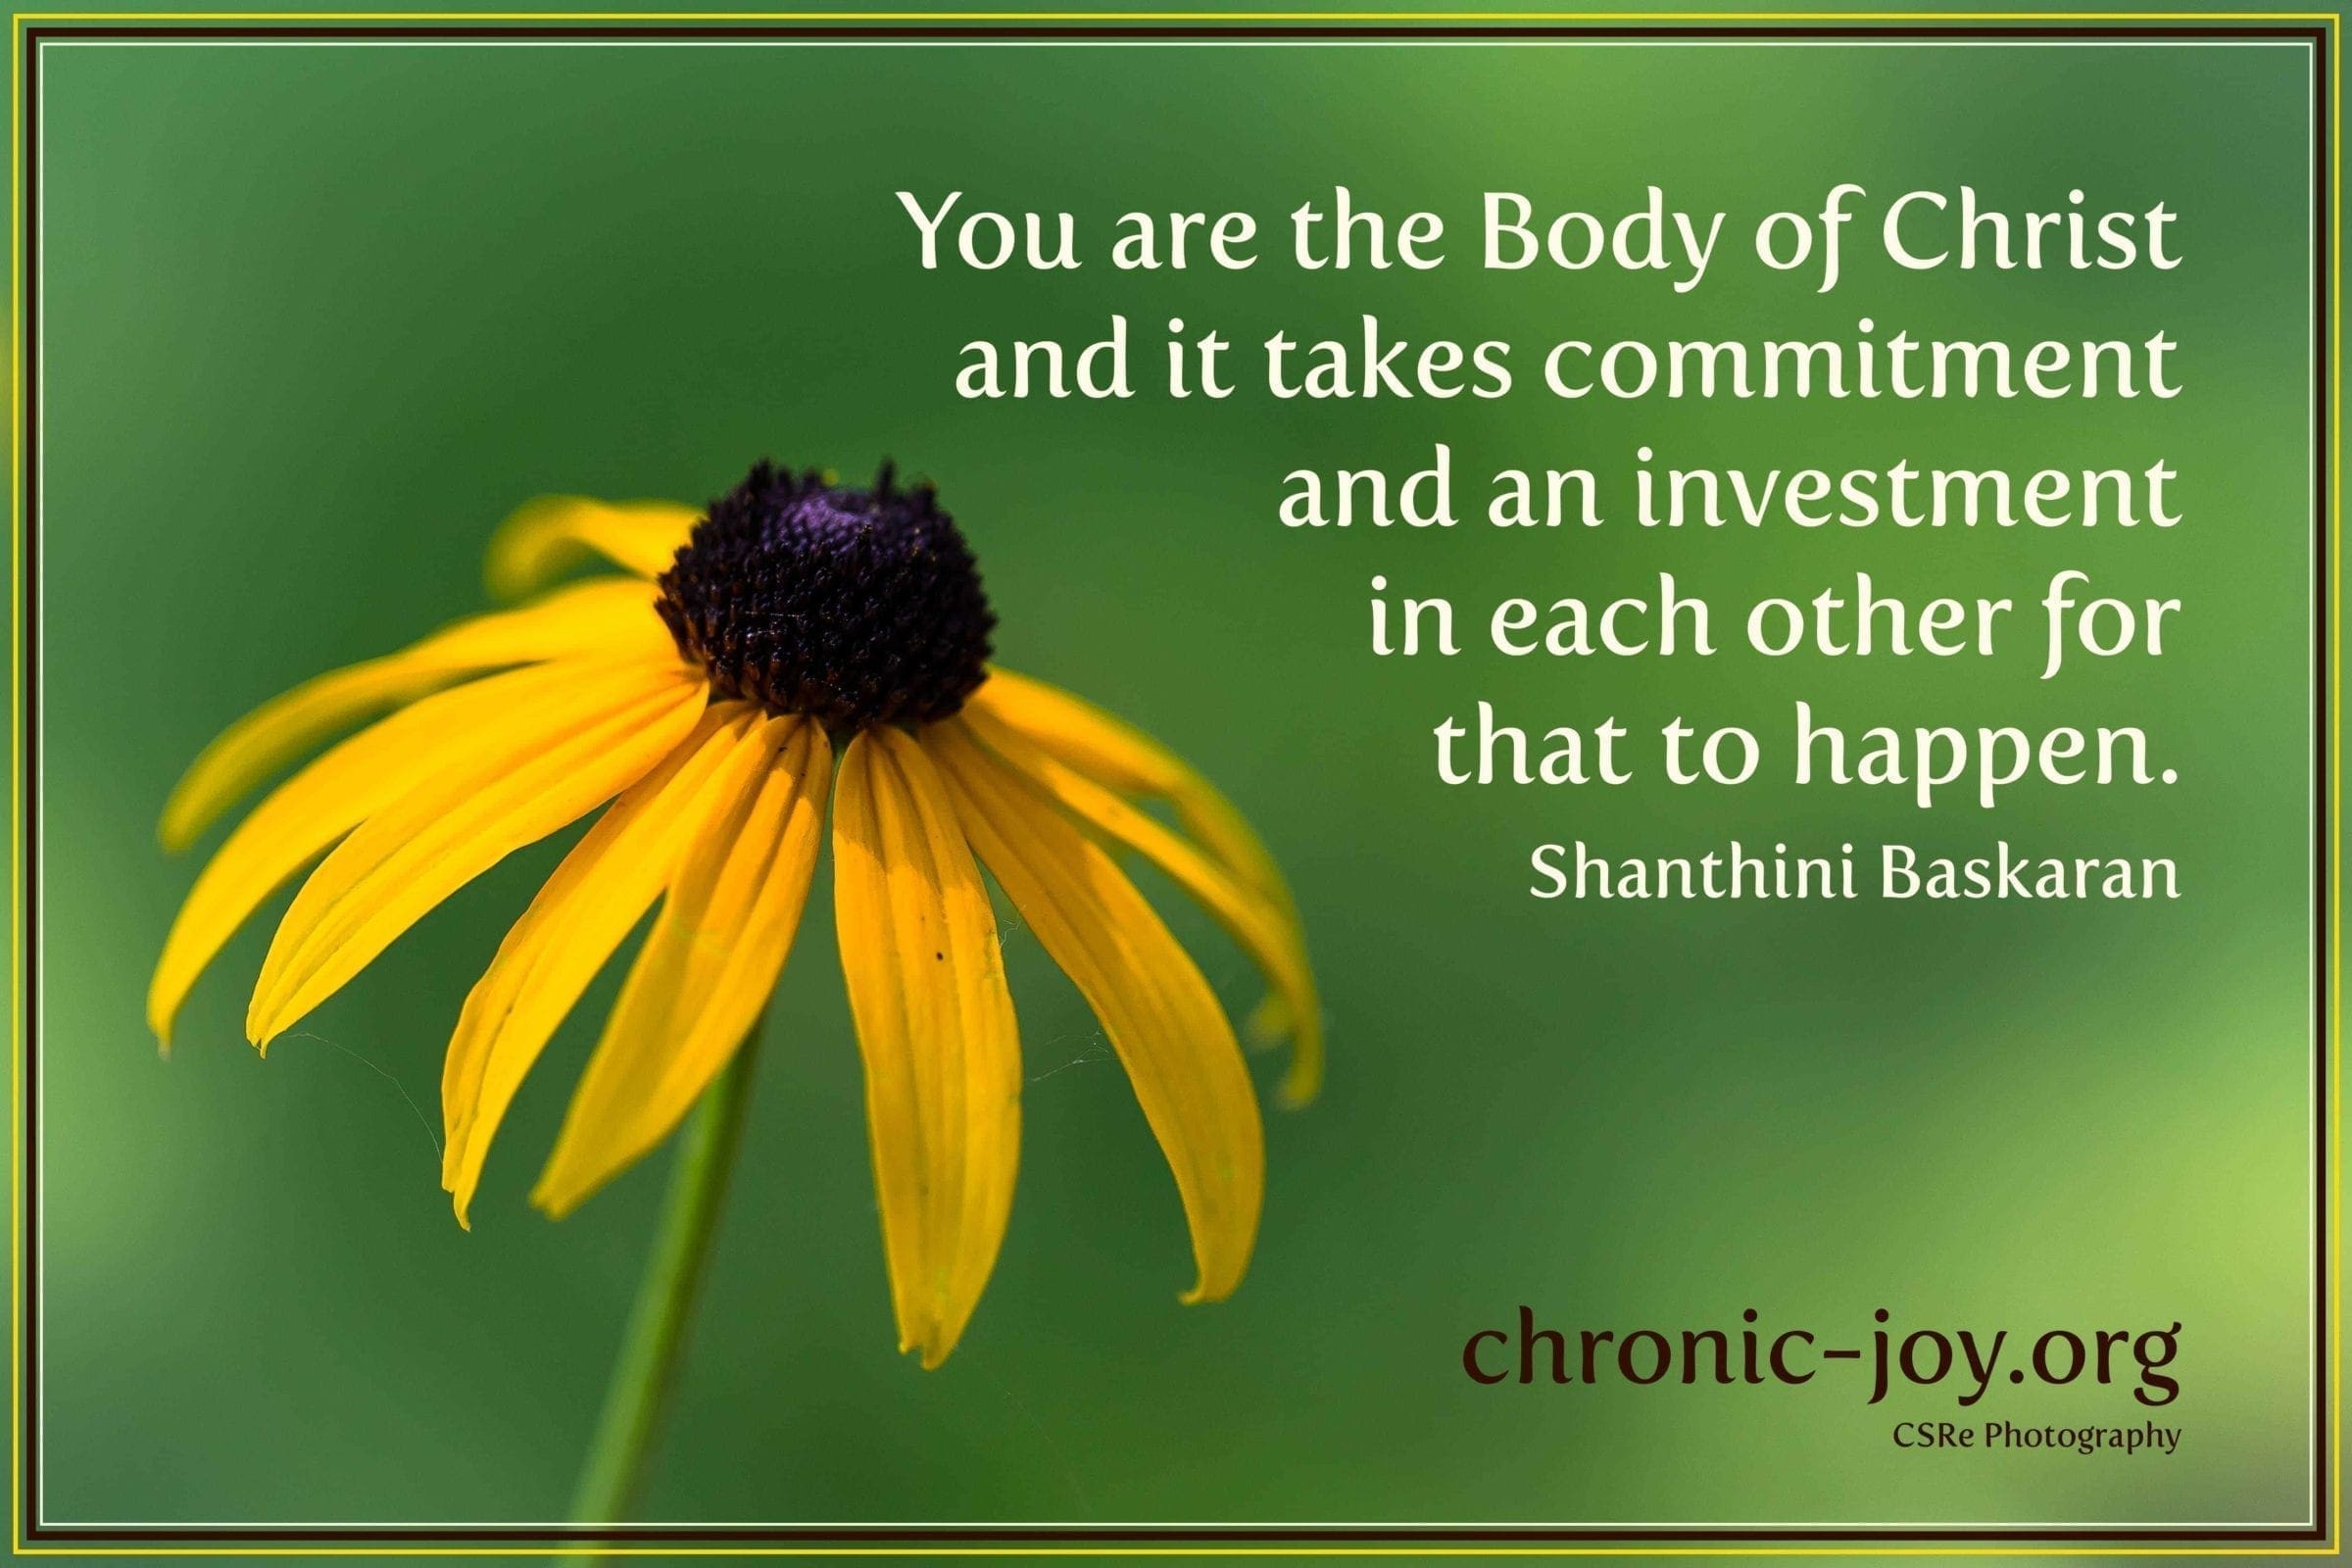 You are the Body of Christ - invest in each other.